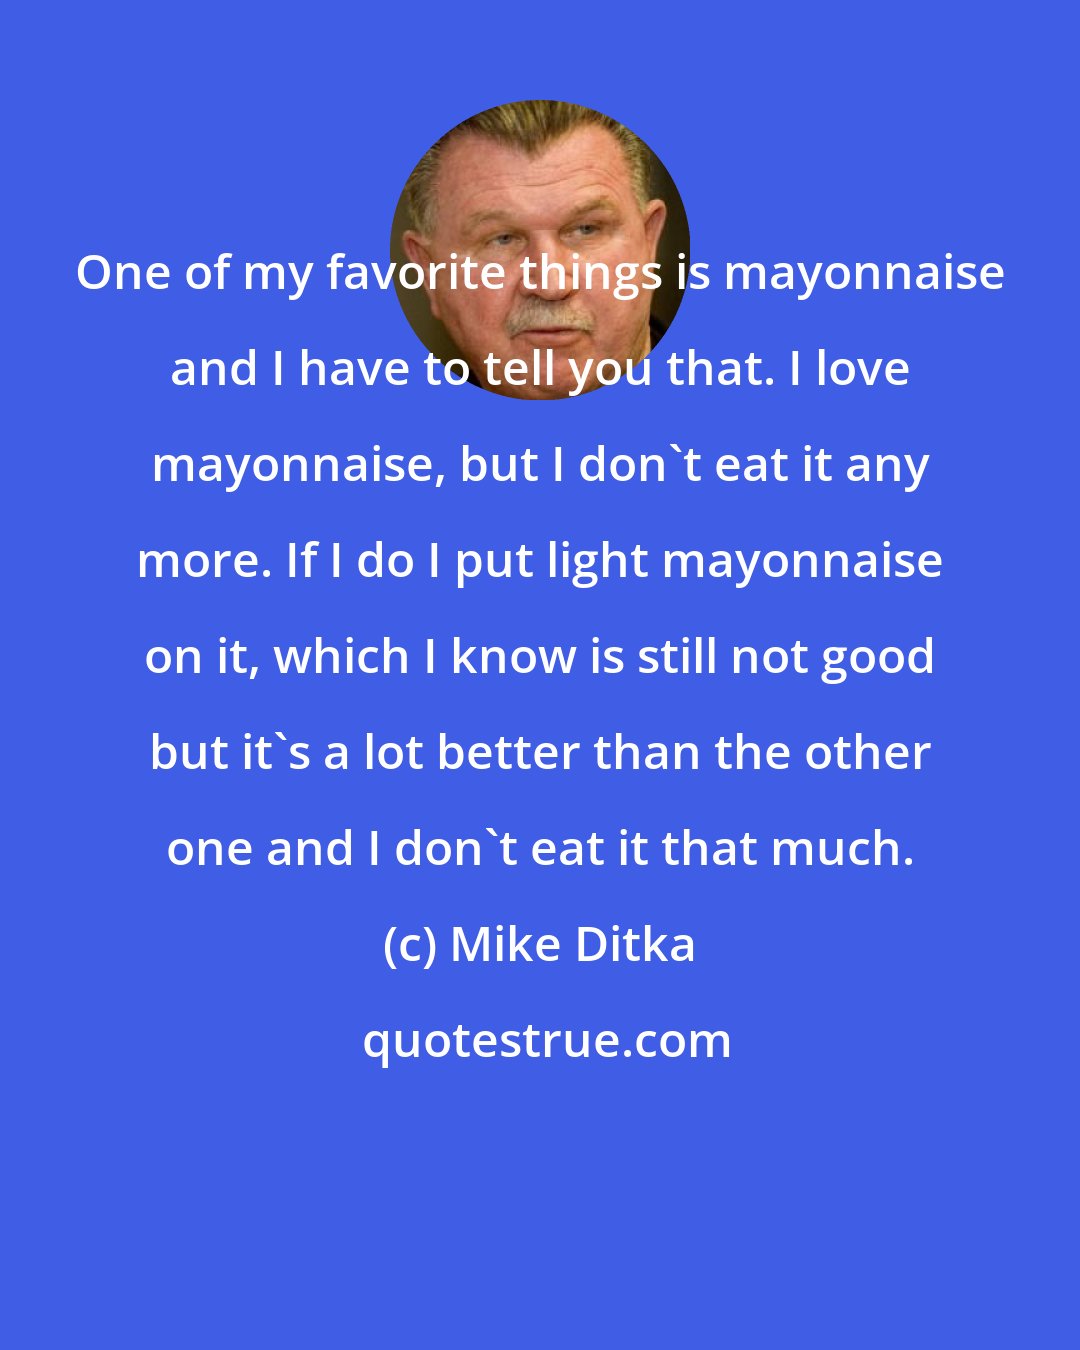 Mike Ditka: One of my favorite things is mayonnaise and I have to tell you that. I love mayonnaise, but I don't eat it any more. If I do I put light mayonnaise on it, which I know is still not good but it's a lot better than the other one and I don't eat it that much.